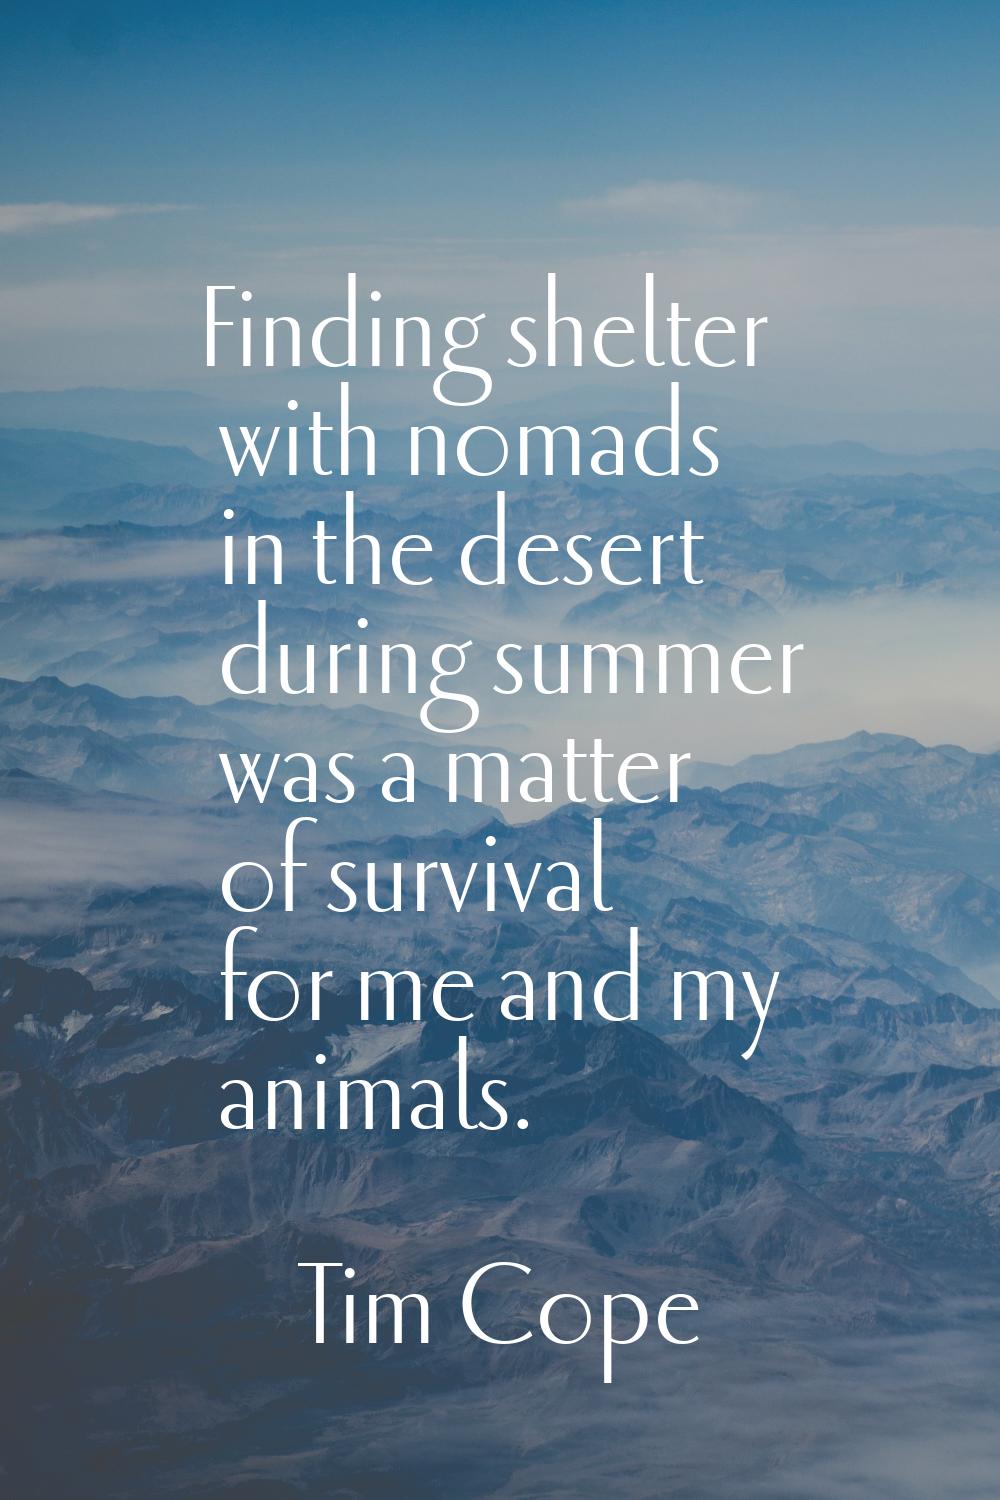 Finding shelter with nomads in the desert during summer was a matter of survival for me and my anim